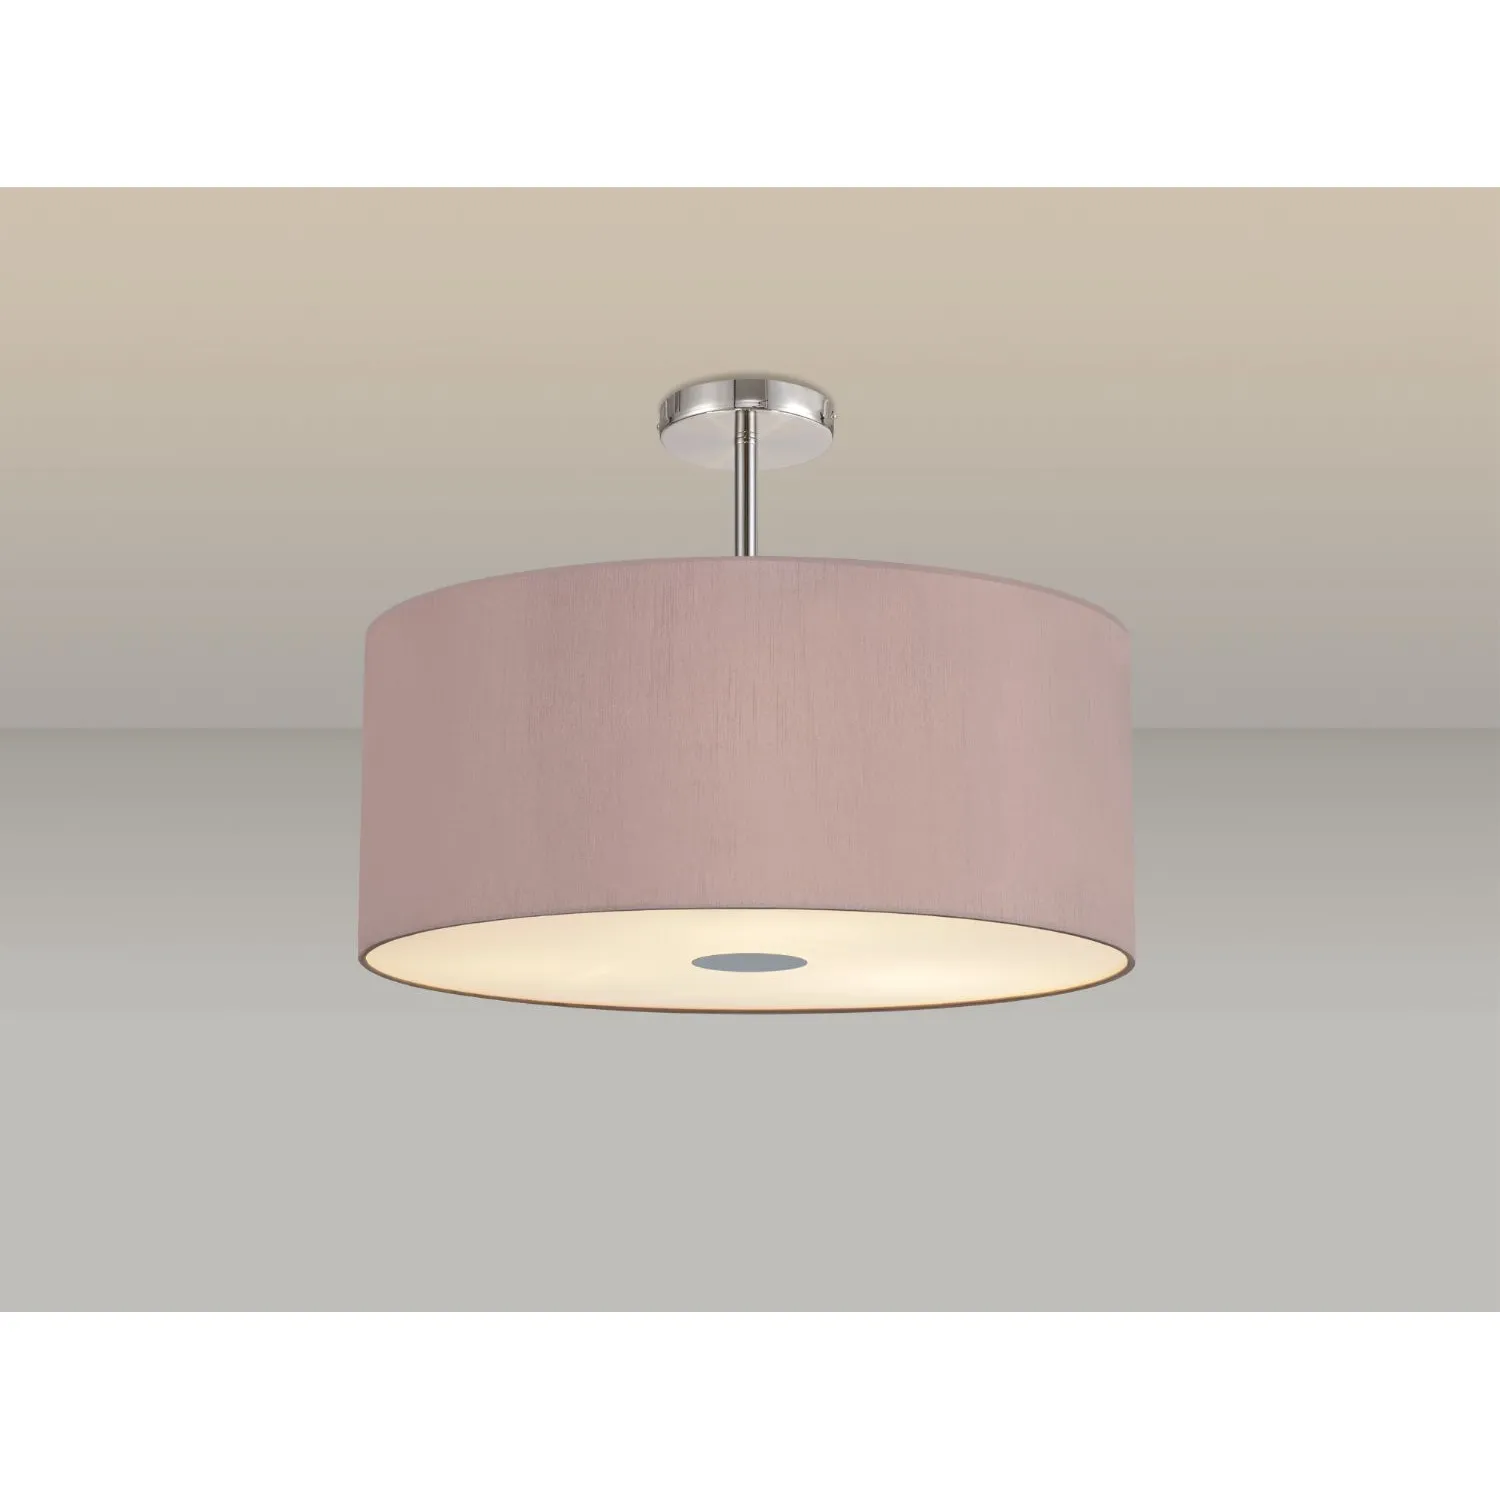 Baymont Polished Chrome 5 Light E27 Semi Flush Fixture c w 600 Dual Faux Silk Fabric Shade, Taupe Halo Gold And 600mm Frosted PC Acrylic Diffuser